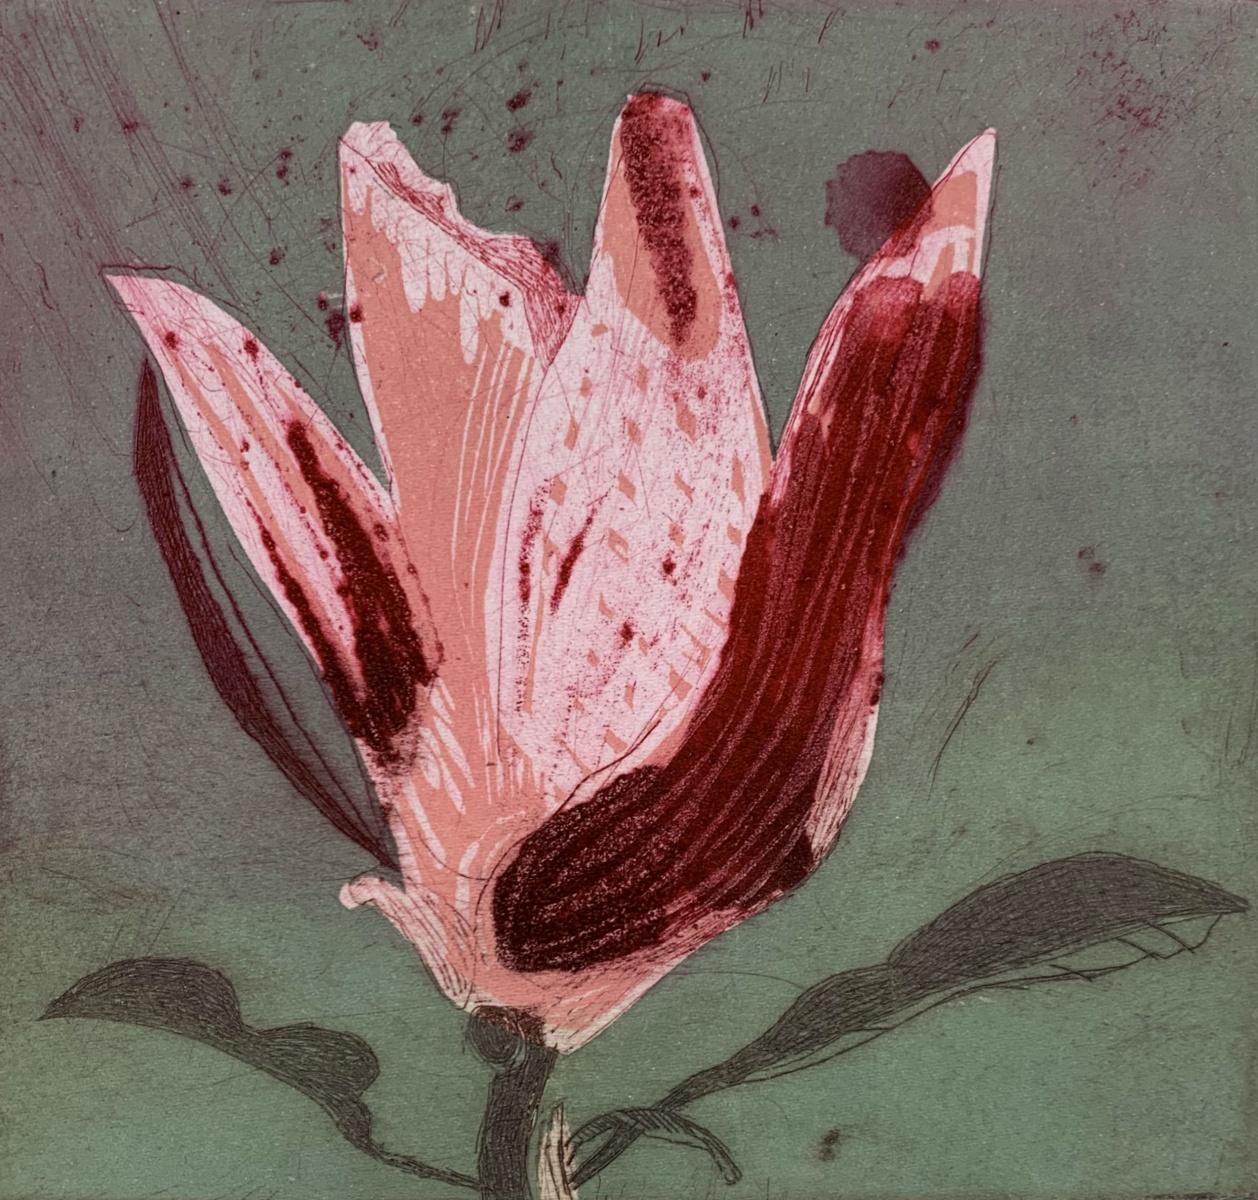 Magnolia 11 - Contemporary Figurative Drypoint Etching Print, Flower, Floral